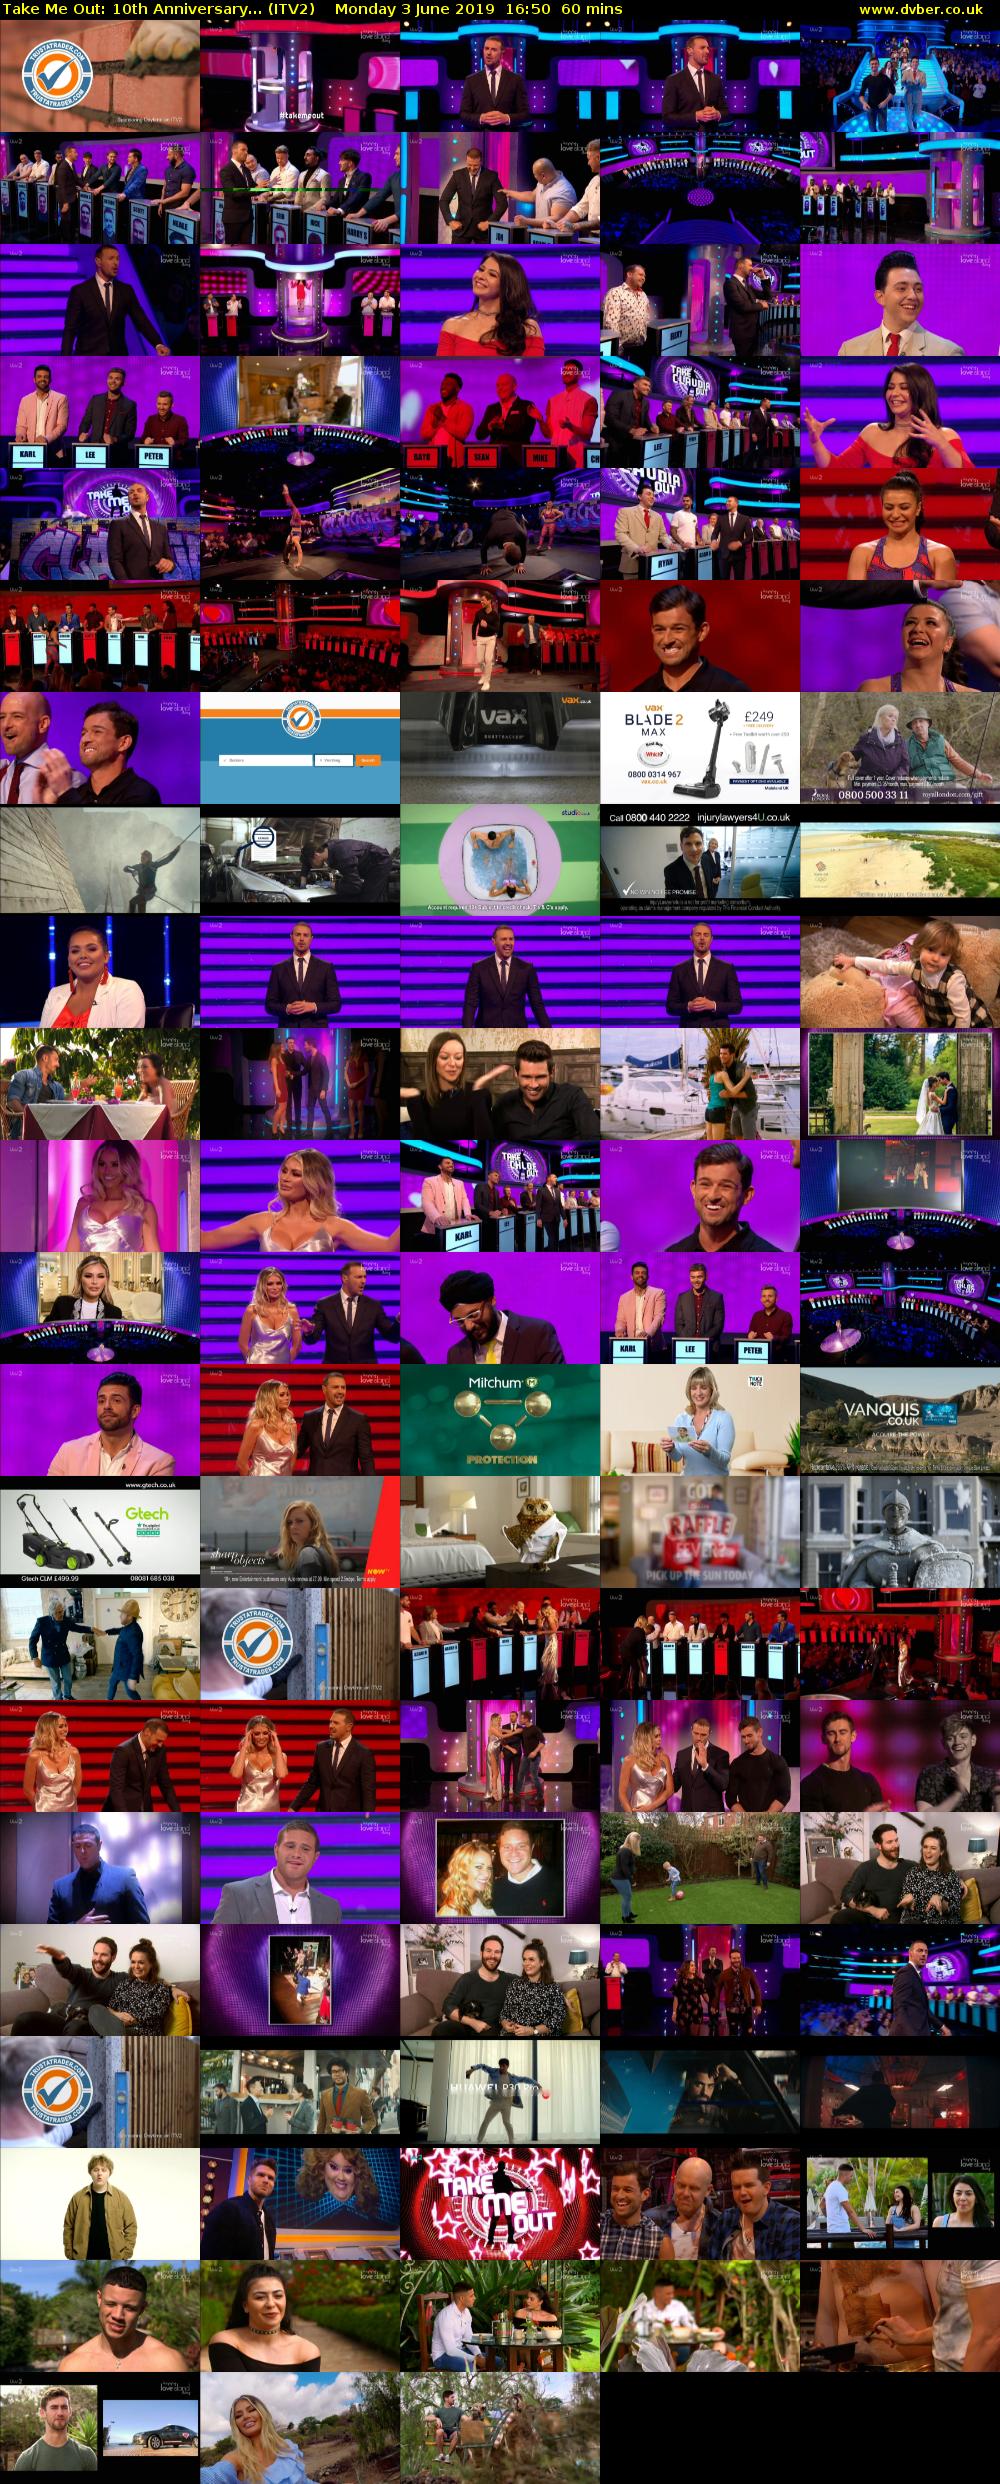 Take Me Out: 10th Anniversary... (ITV2) Monday 3 June 2019 16:50 - 17:50